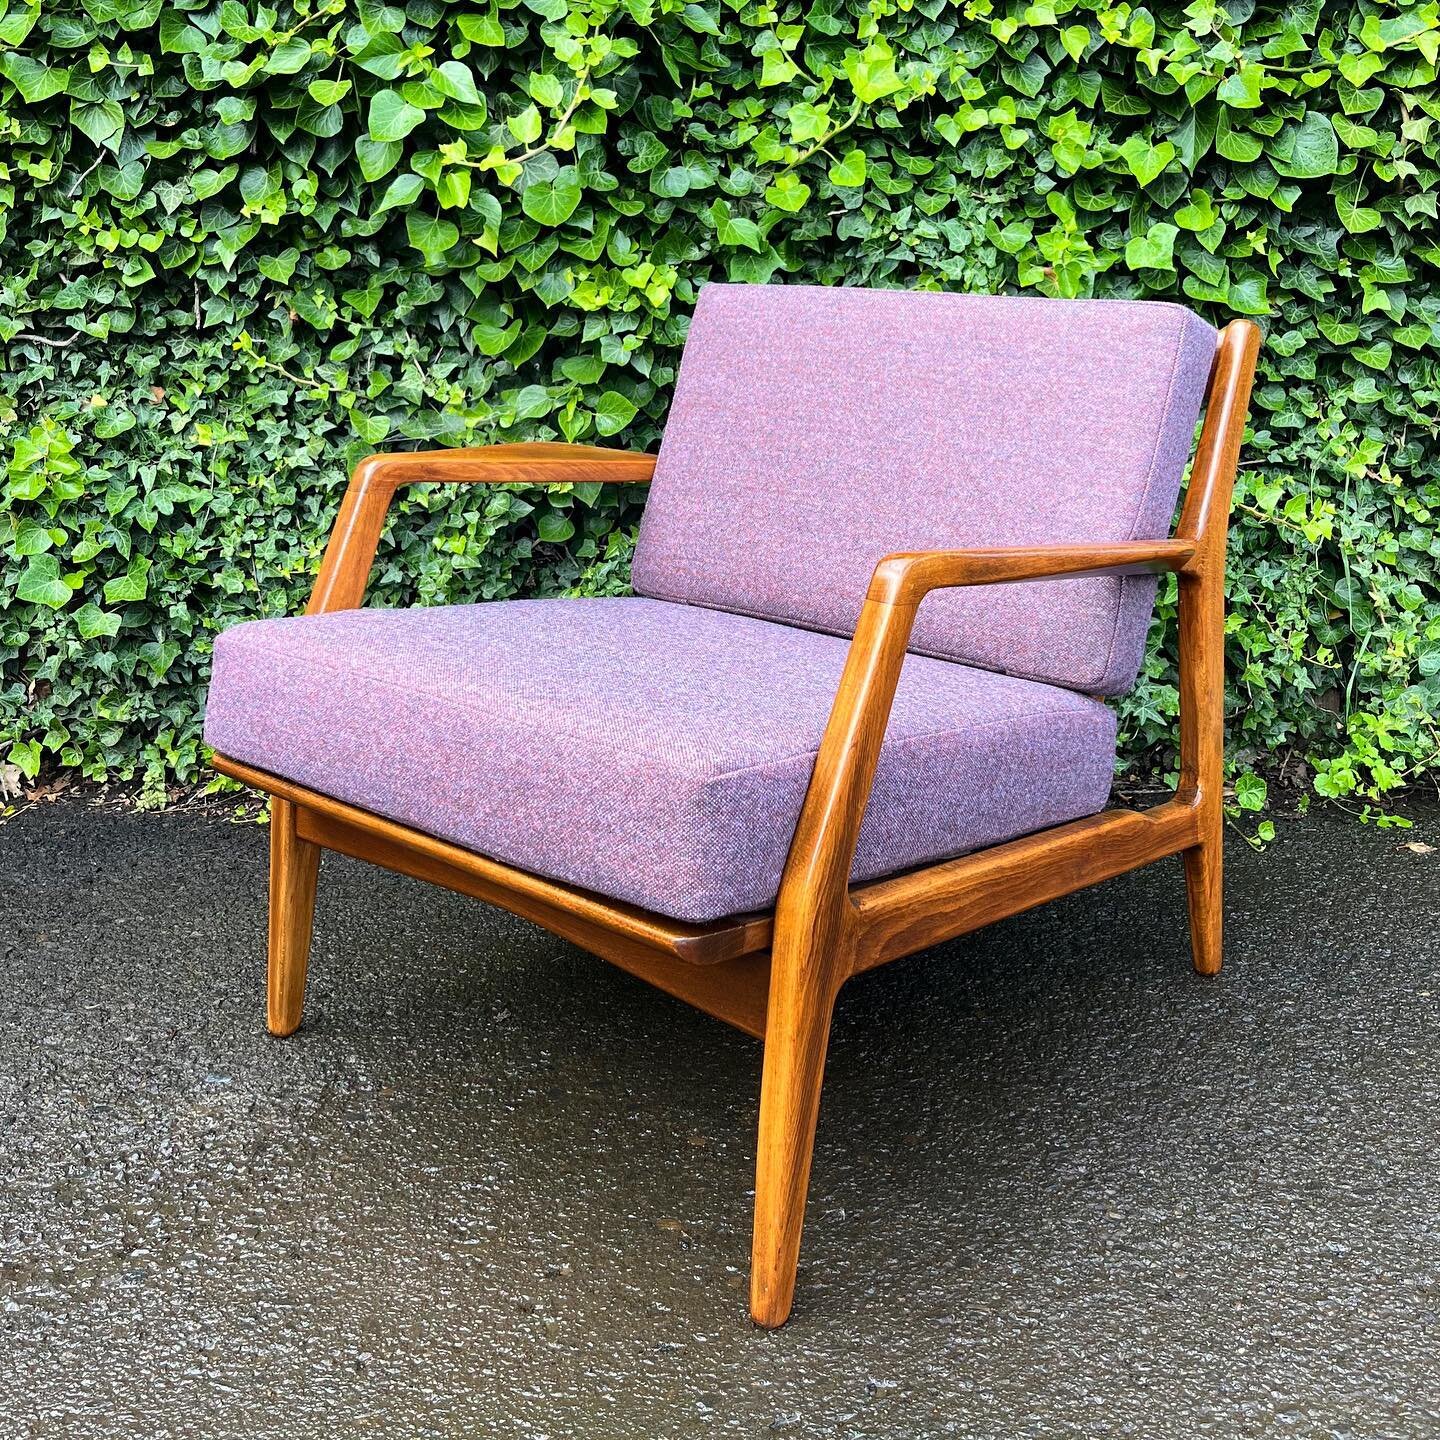 A set of gorgeous Lawrence Peabody lounge chairs just got some serious lovin. Customer-restored frames and fresh cushions redone in the dreamy woolen Maharam Beck in Resplendent. American-designed and made in Denmark with Danish beech, a perfect exam